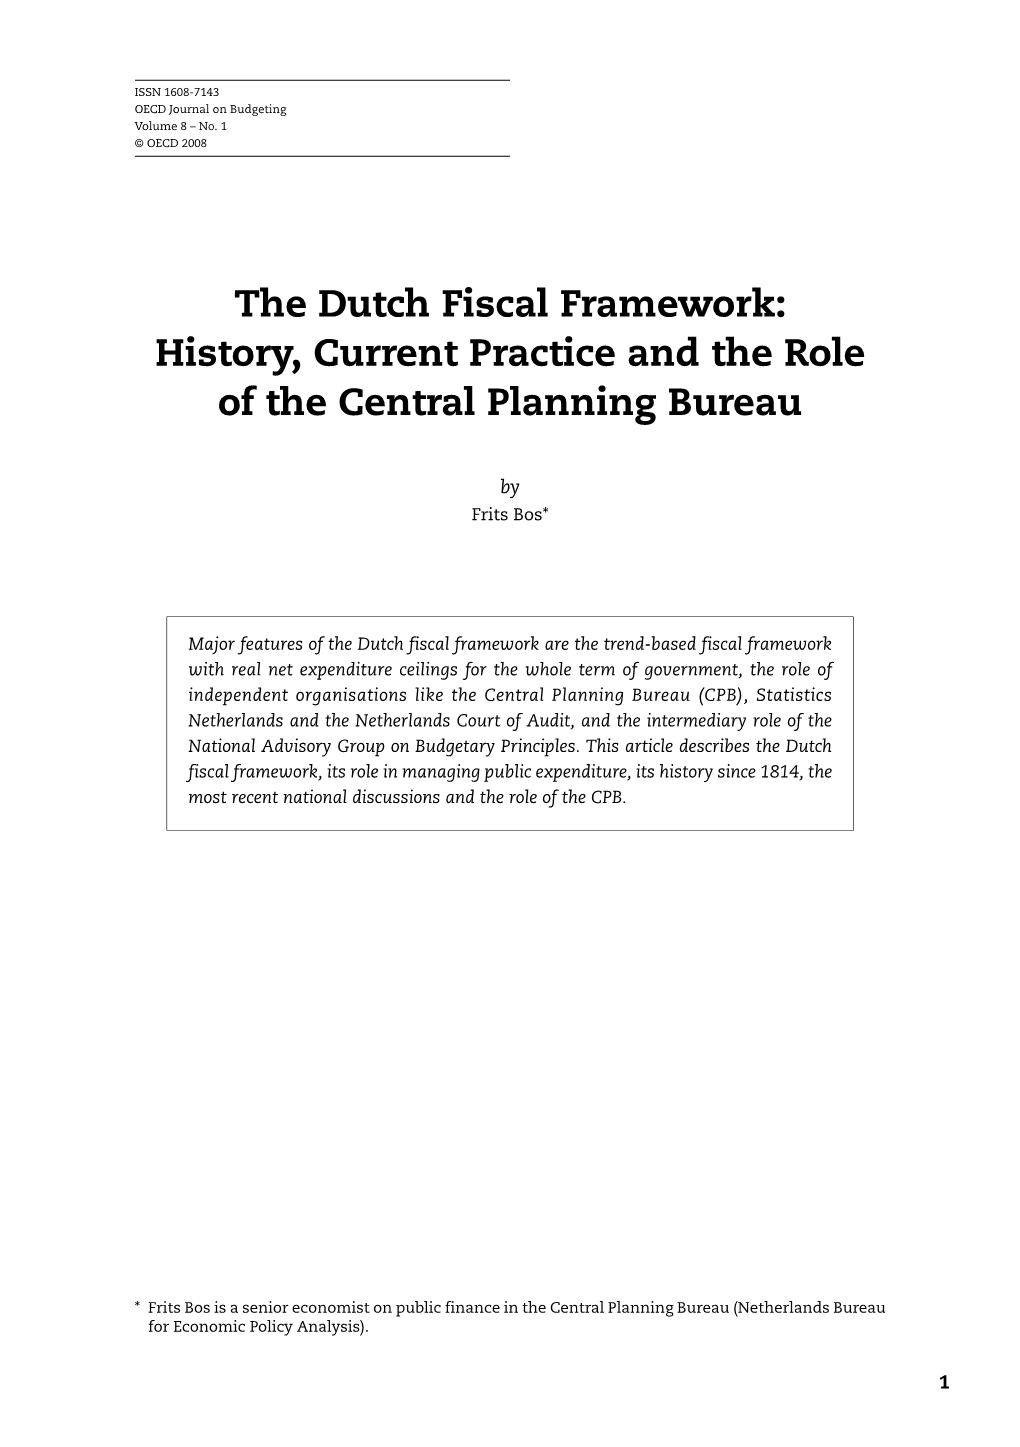 The Dutch Fiscal Framework: History, Current Practice and the Role of the Central Planning Bureau